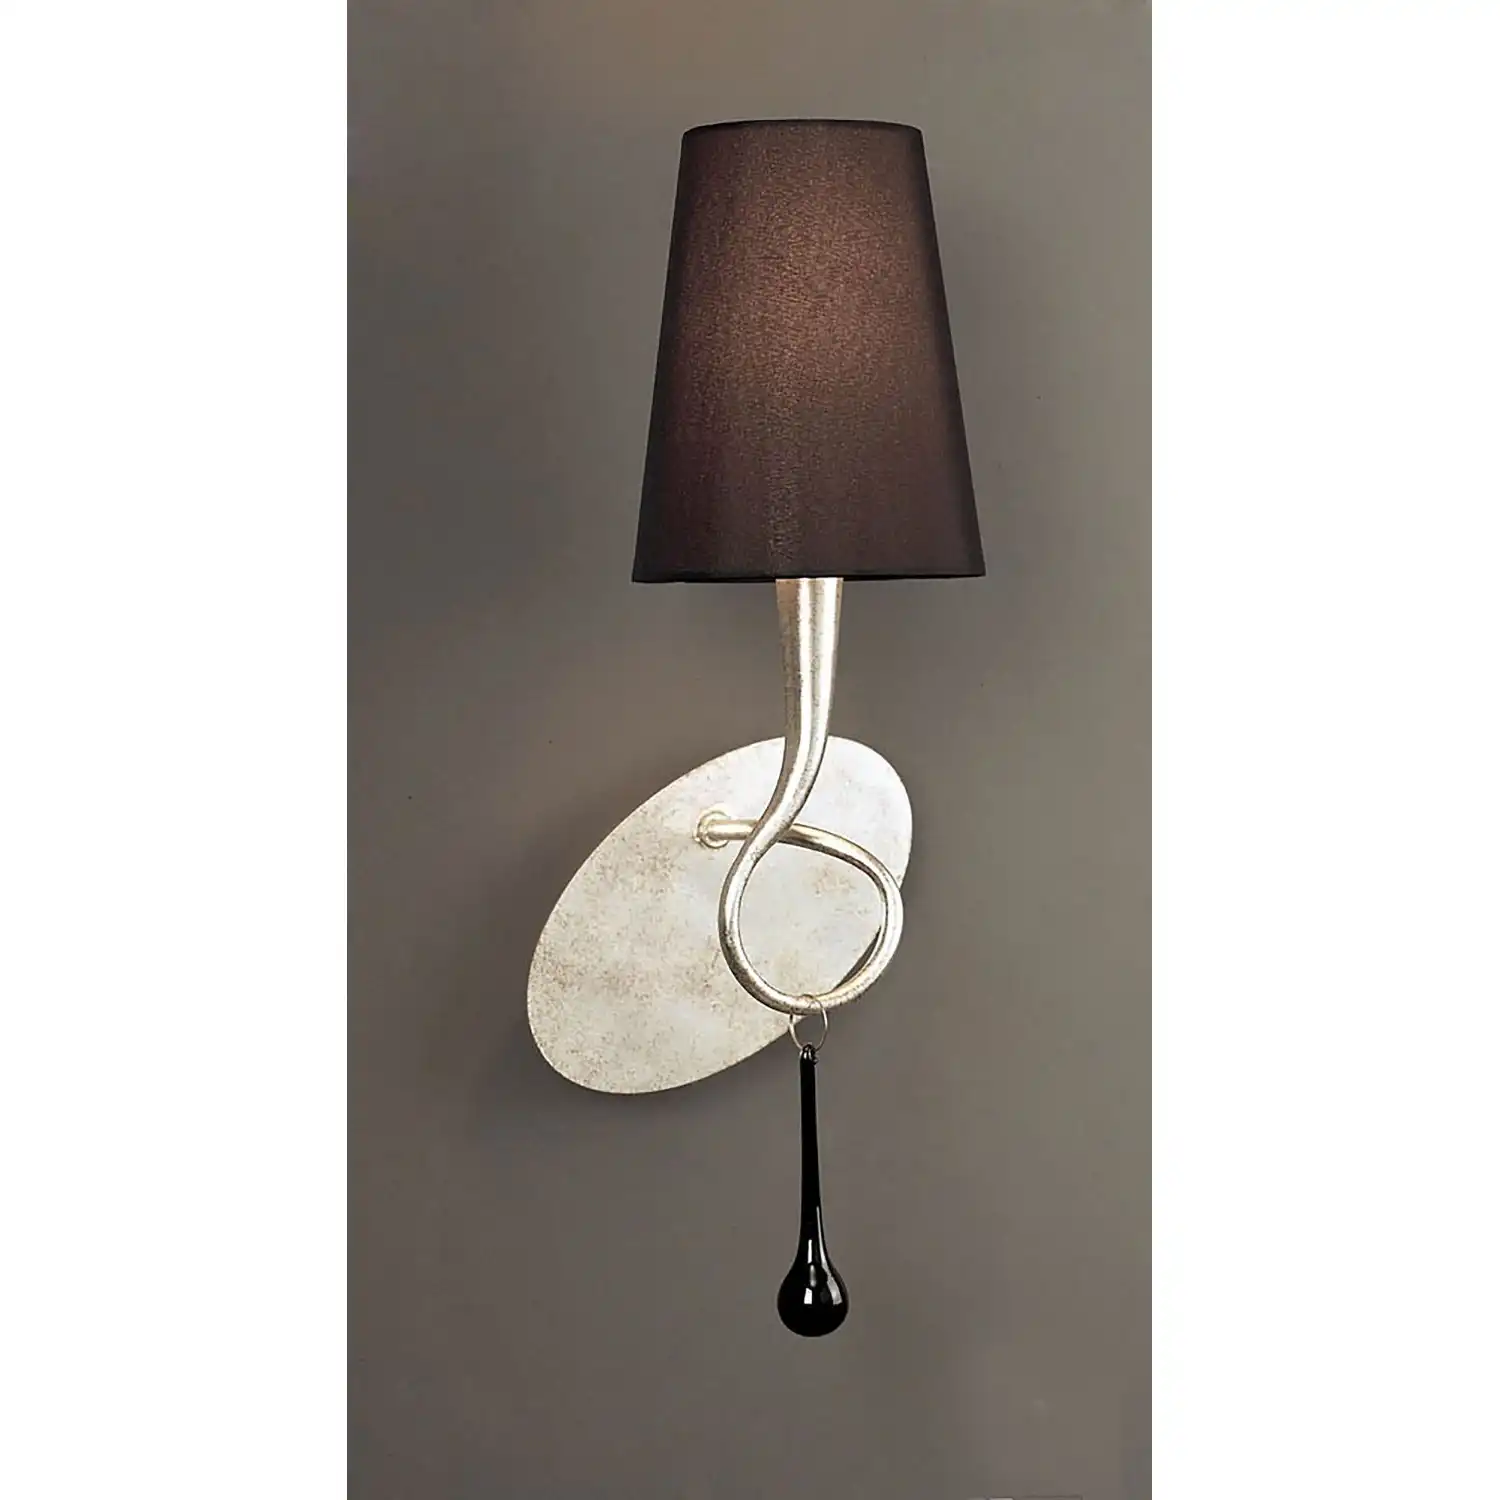 Paola Wall Lamp 1 Light E14, Silver Painted With Black Shade And Black Glass Droplets